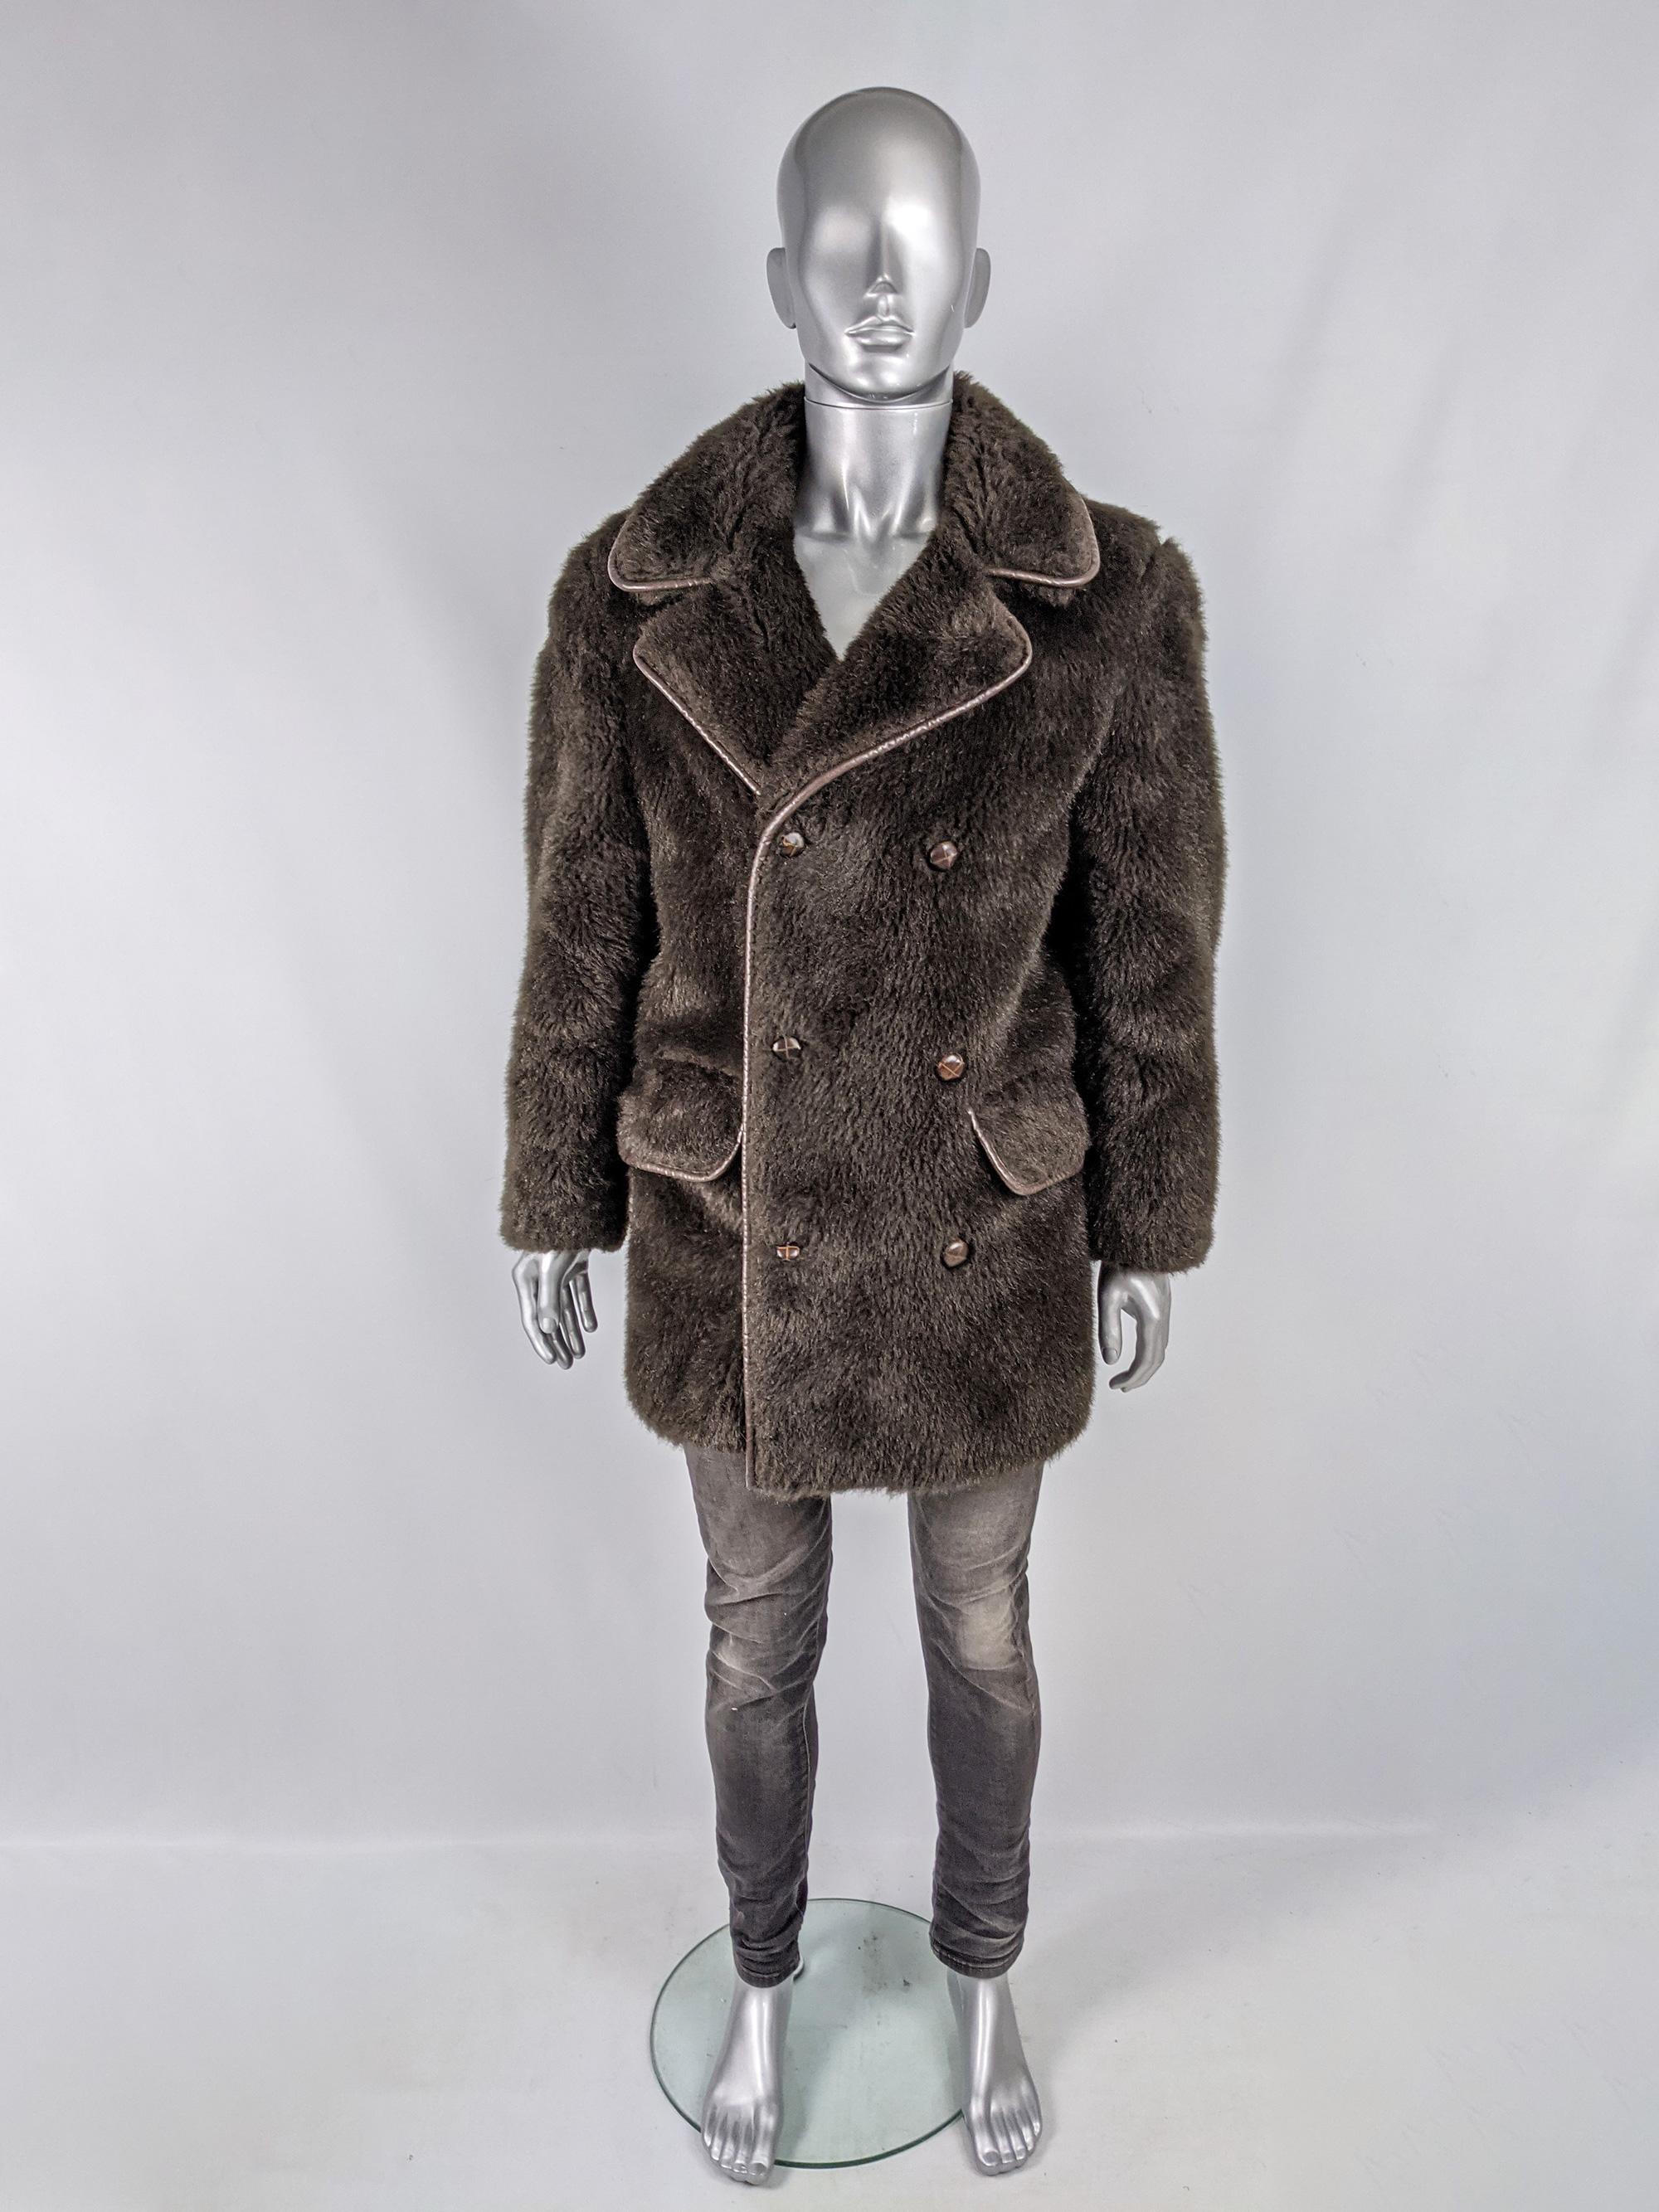 An incredible mens John Richmond vintage faux fur overcoat from the 90s with an obvious 70s inspiration. In a brown fake fur with mod style double breasted buttons and an awesome rock n roll look. 

Size: Marked M but this gives quite a large